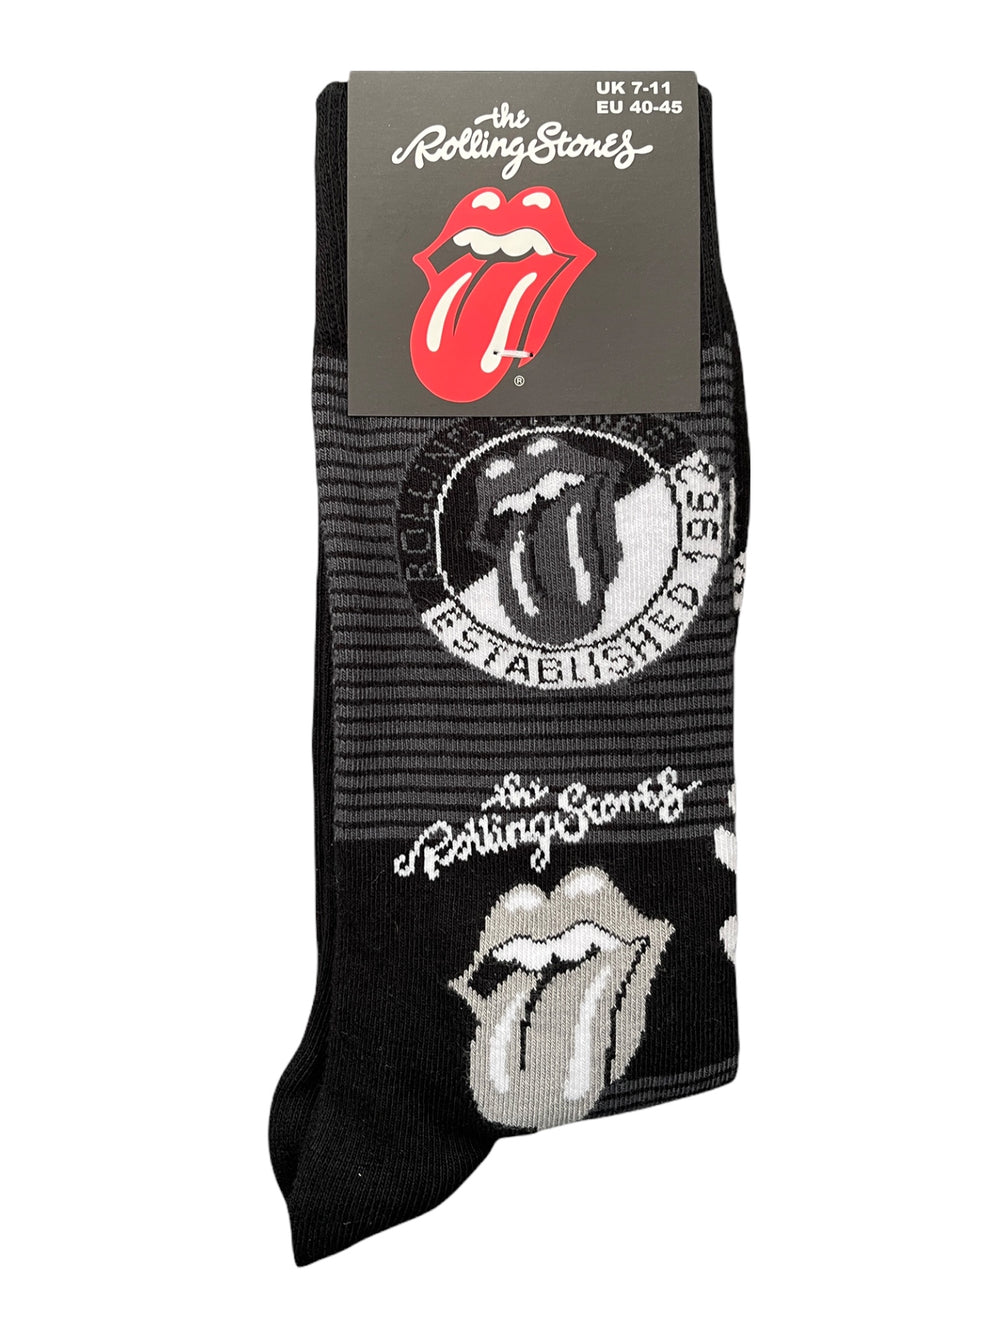 Rolling Stones The - MONO LOGOS Official Product 1 Pair Jacquard Socks Brand NEW